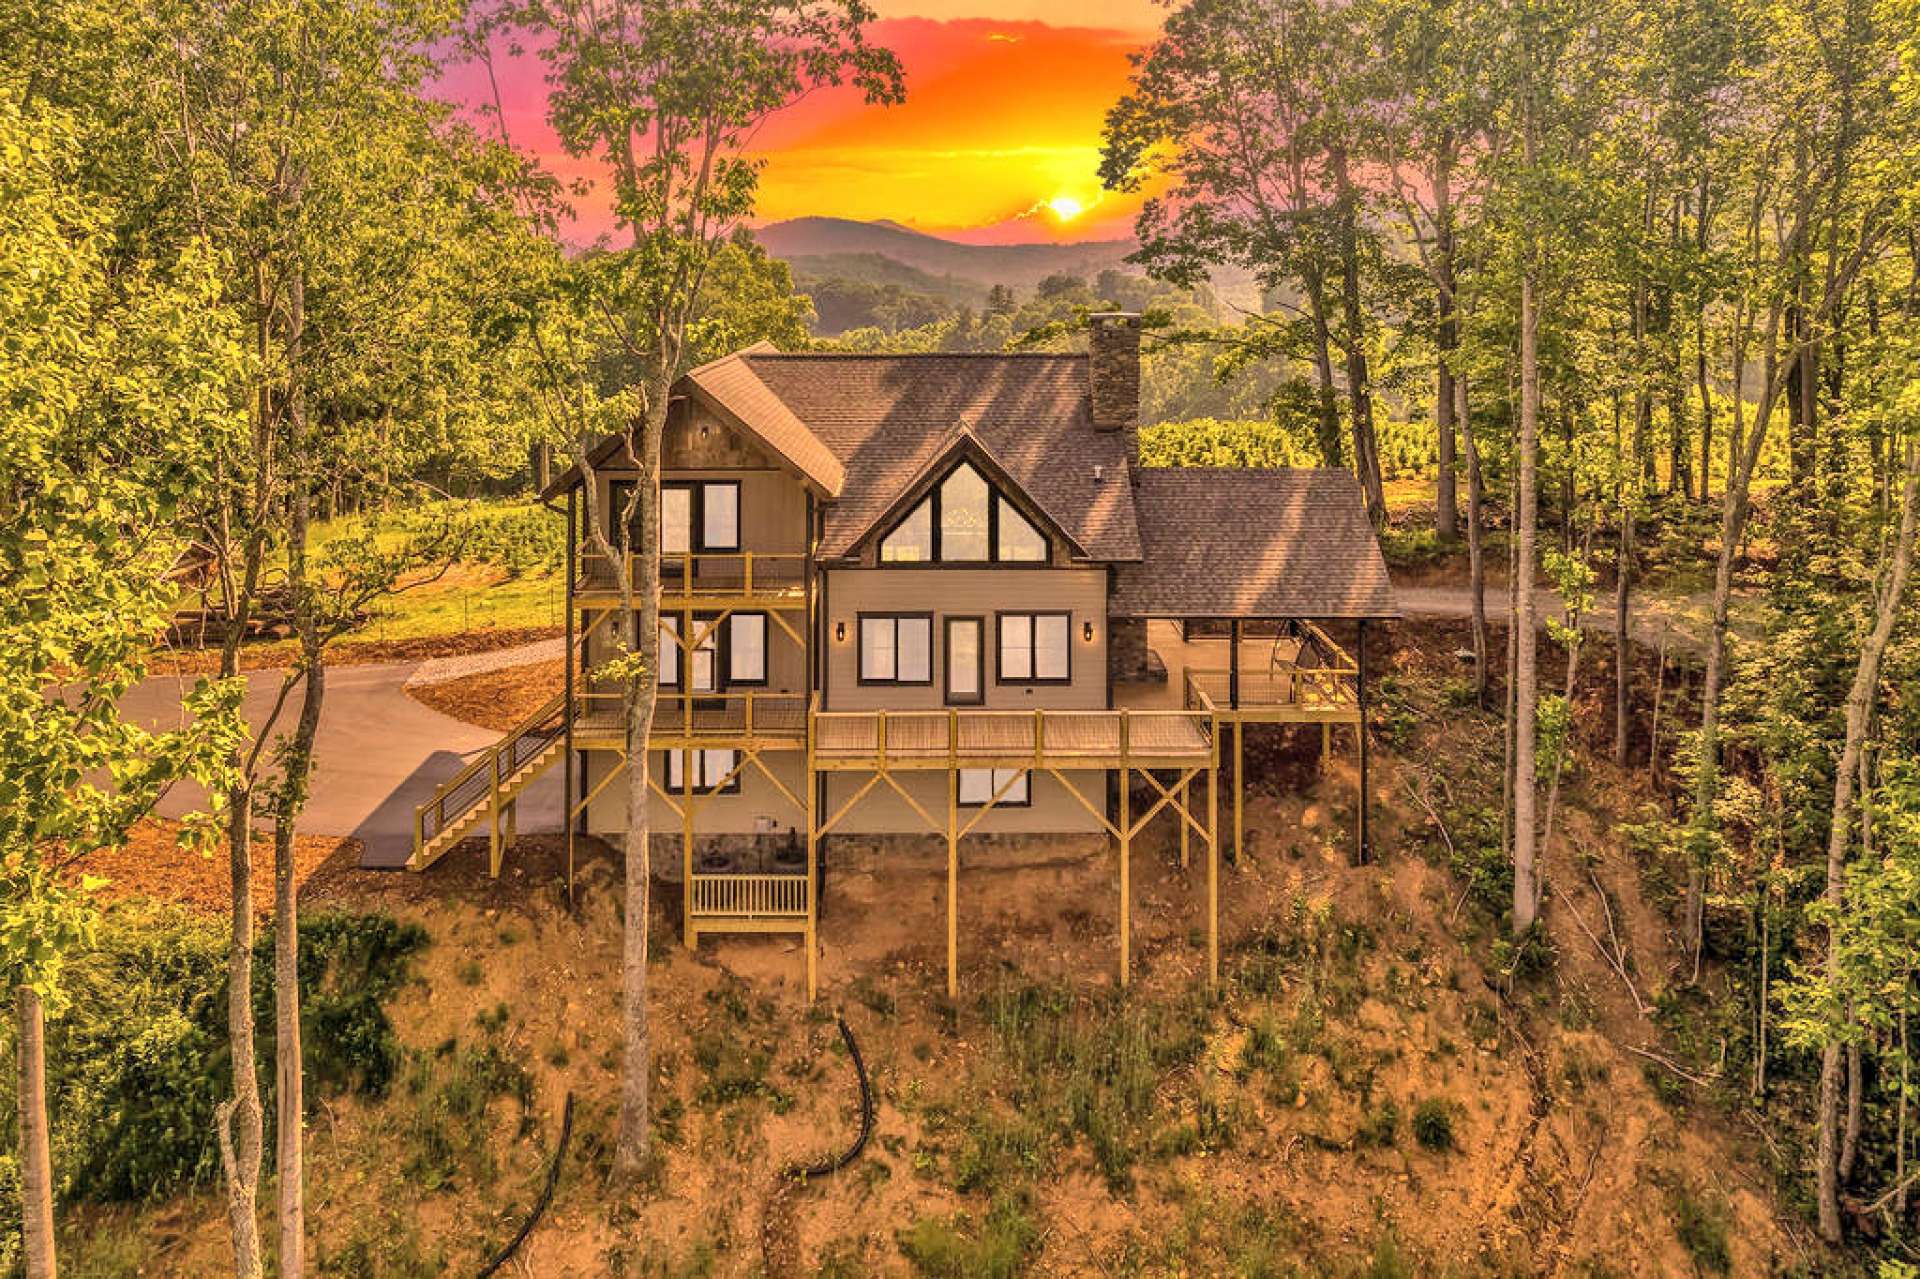 Welcome to your brand new NC Mountain home retreat where every sunrise and sunset leaves a sense of awe and every season presents a colorful surrounding.